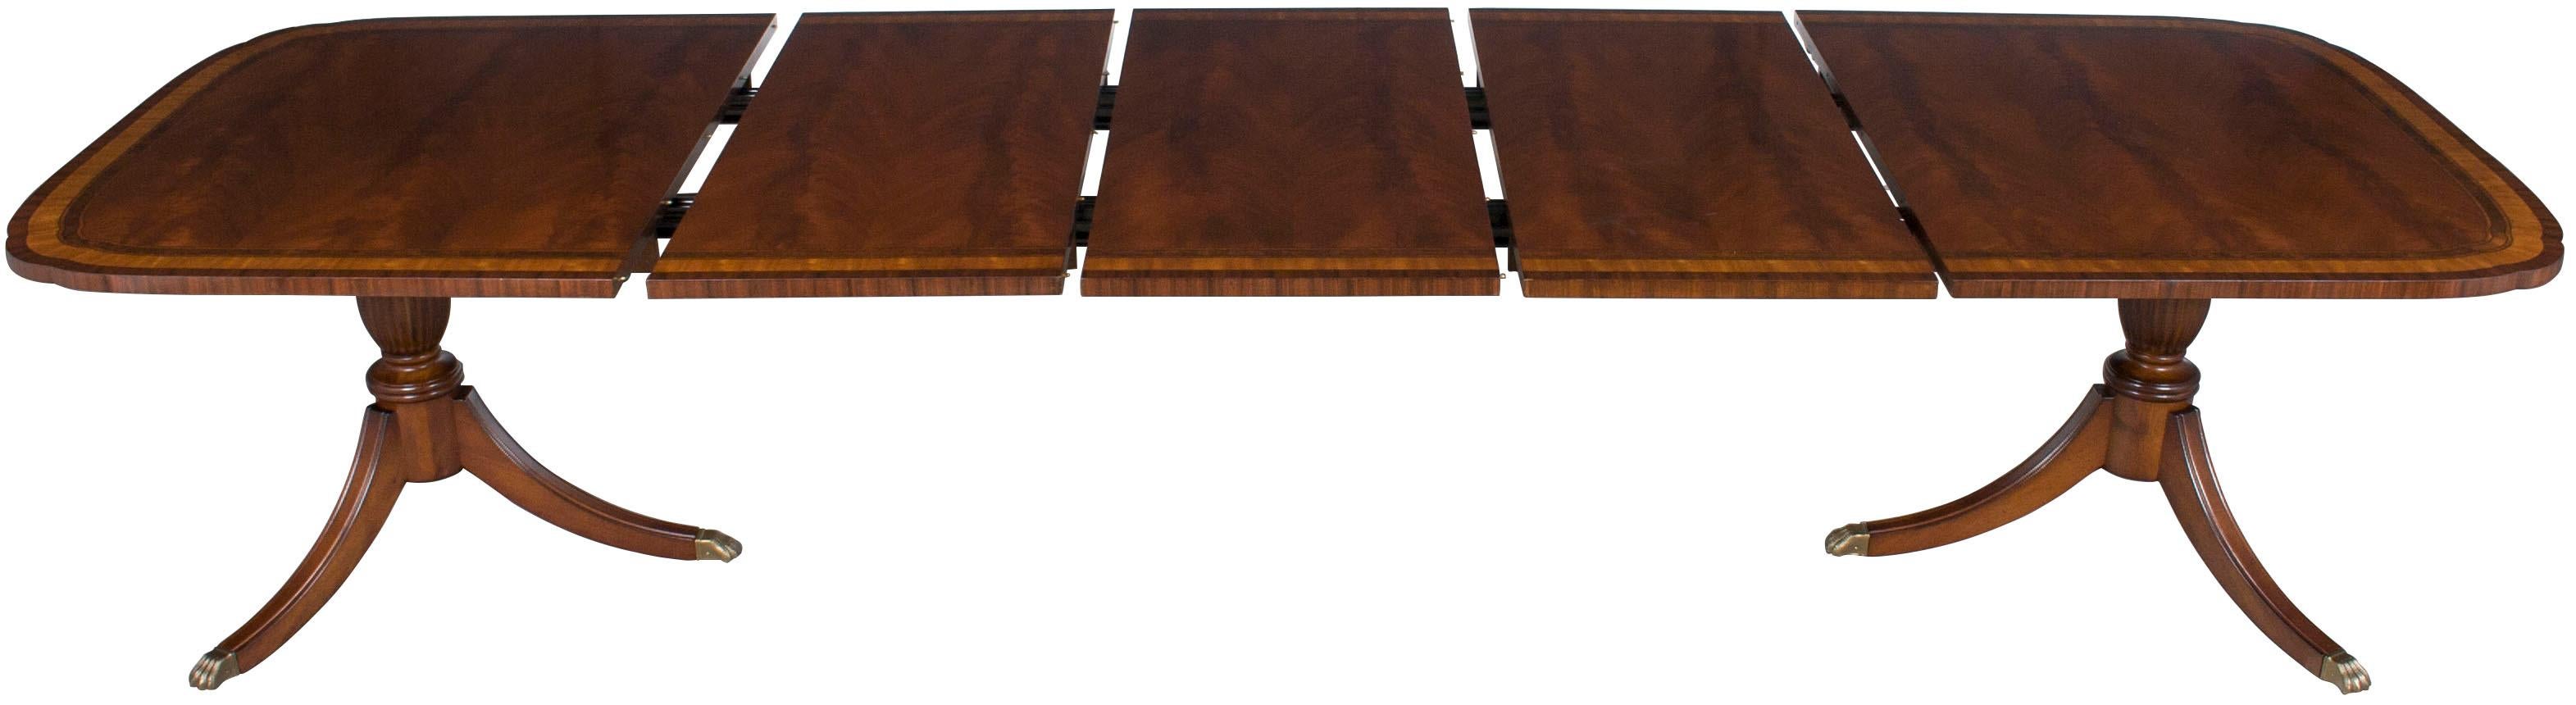 Twelve Foot Long Flame Mahogany Double Pedestal Dining Room or Conference Table For Sale 5